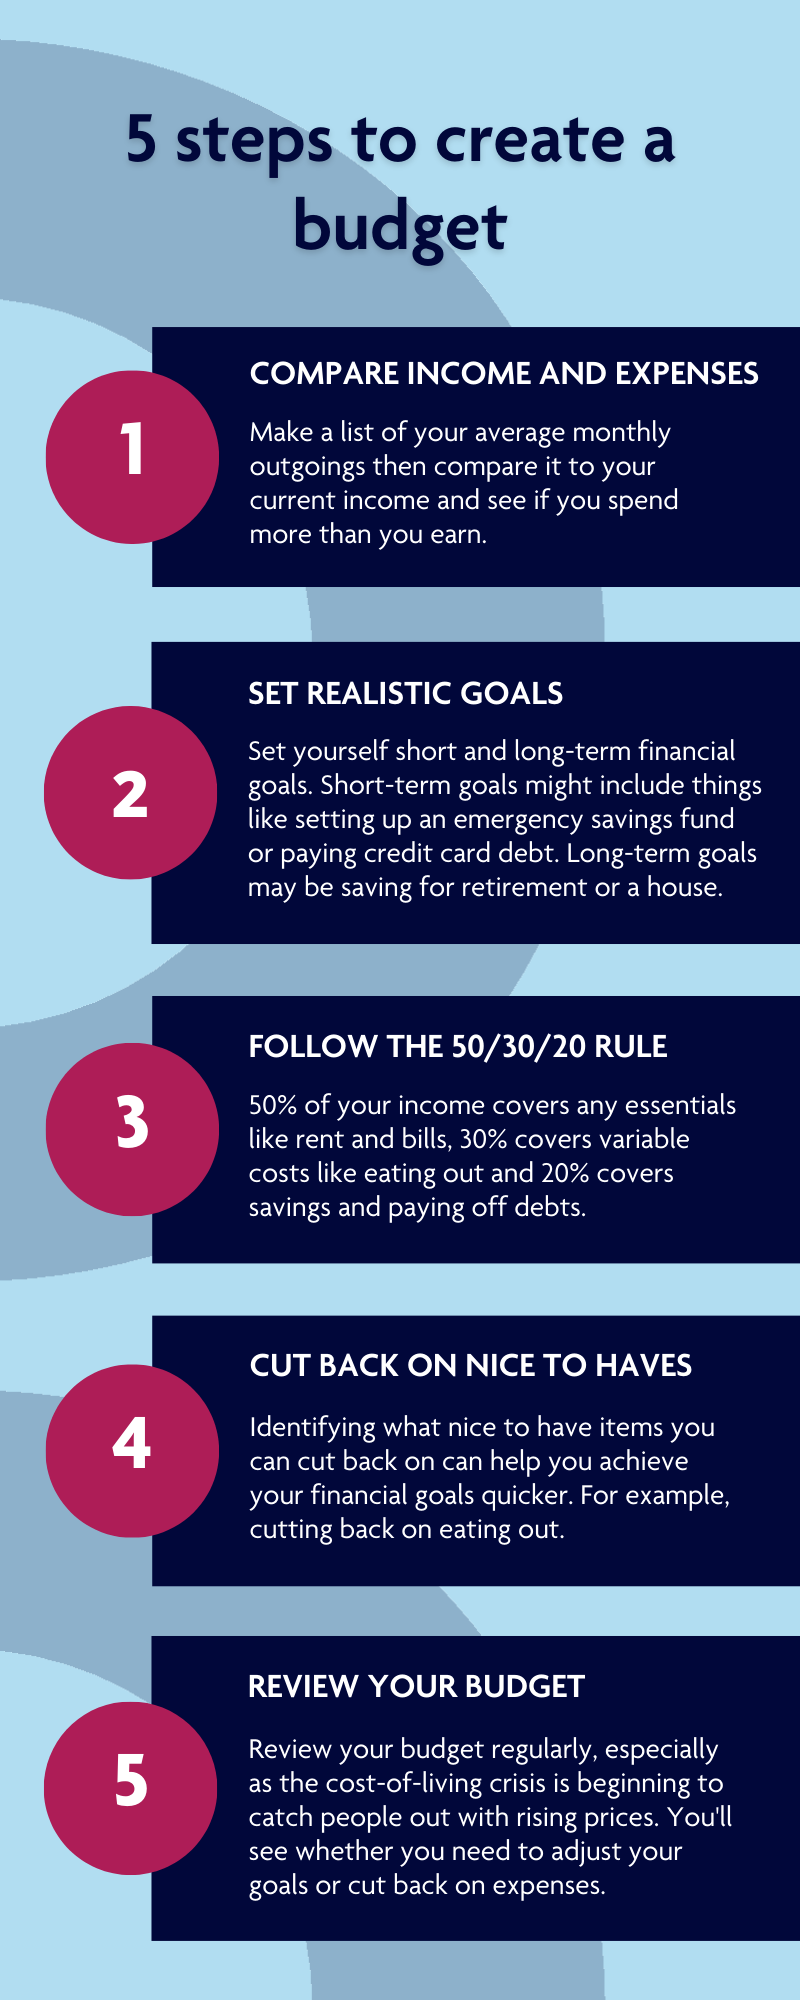 6 Steps to Creating a Budget: Tips, Tricks, and More - Credible